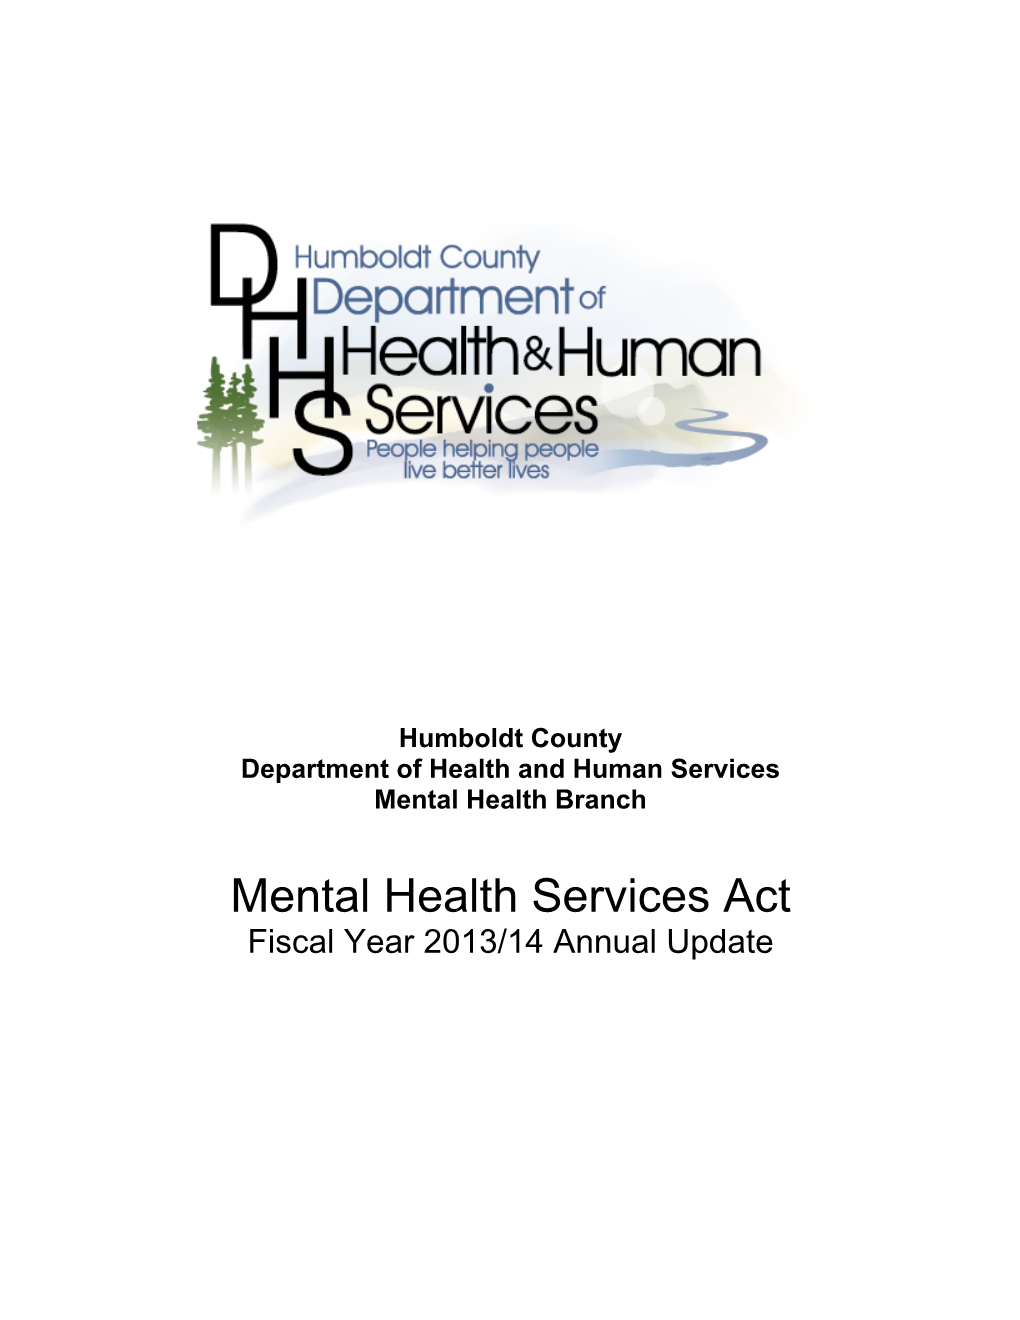 Mental Health Services Act Fiscal Year 2013/14 Annual Update